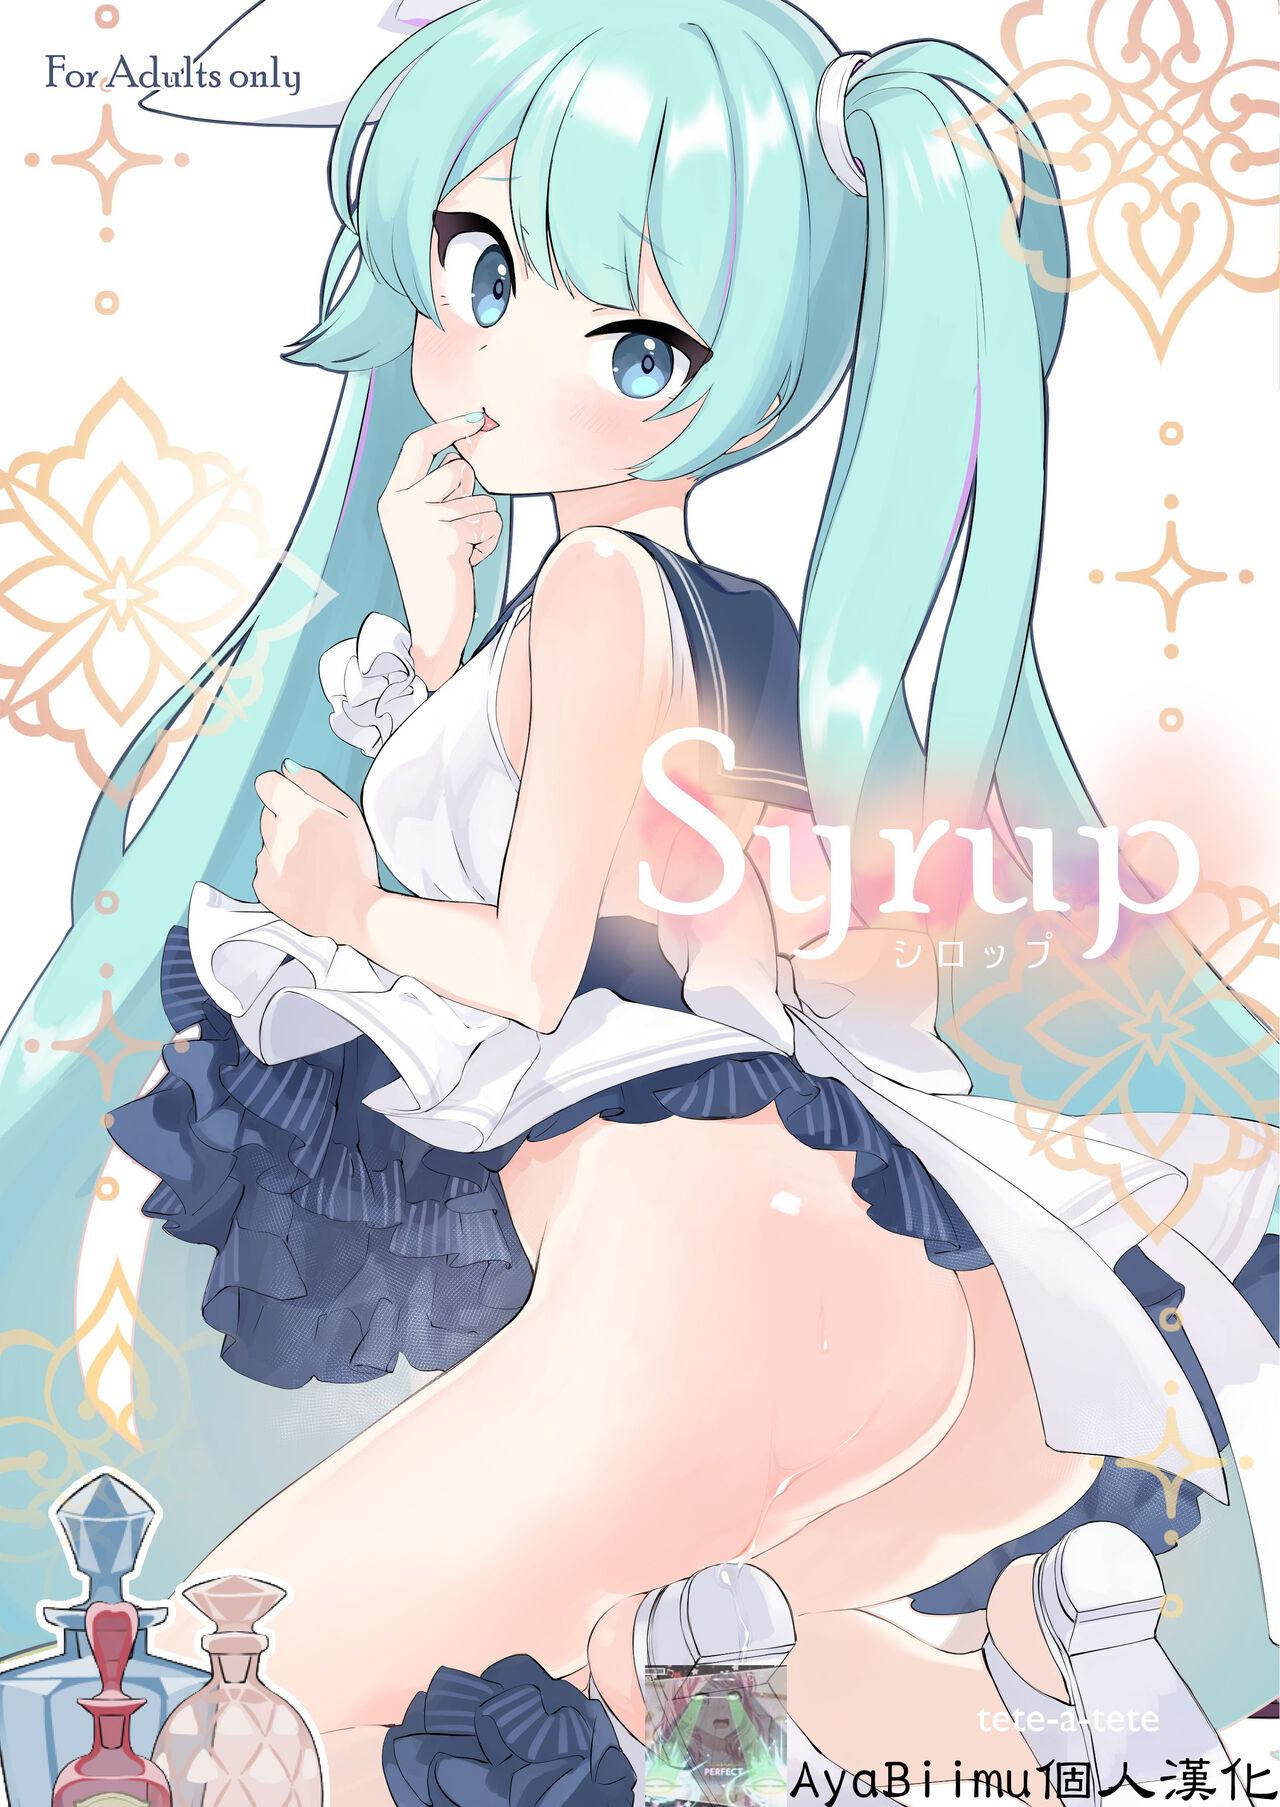 Syrup 0